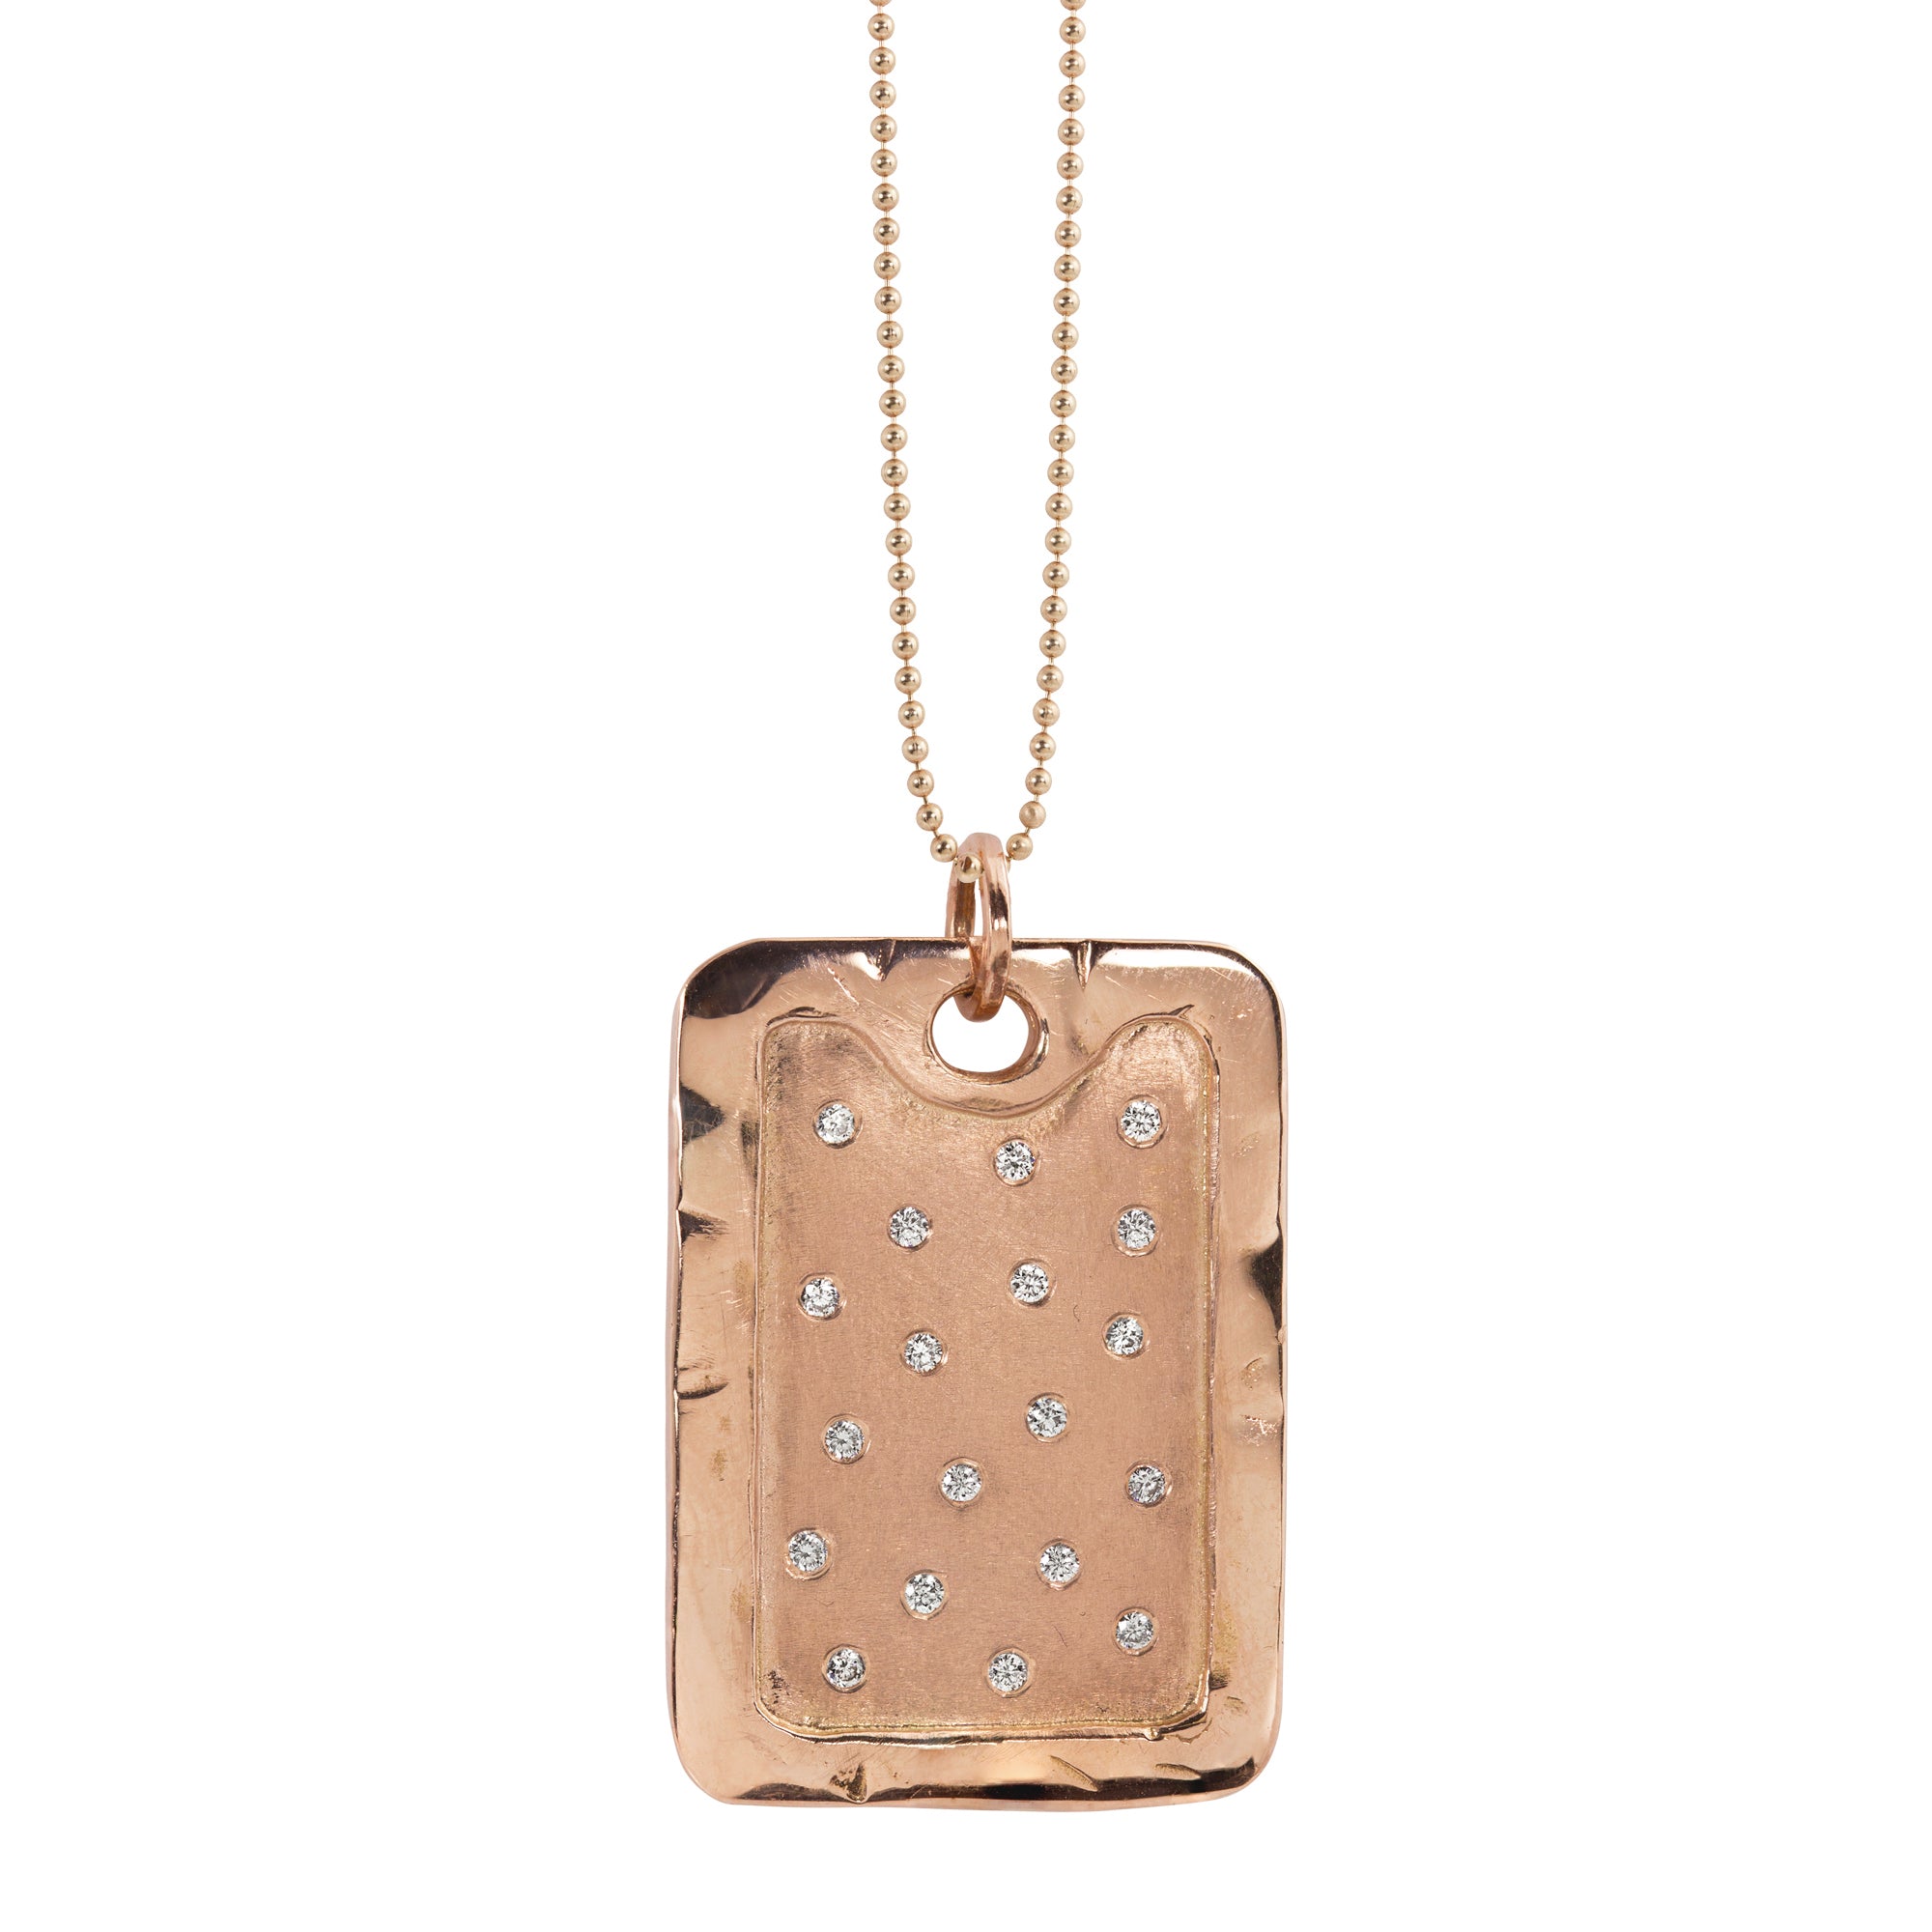 14k rose gold x-large DANI dog tag pendant with scattered diamonds